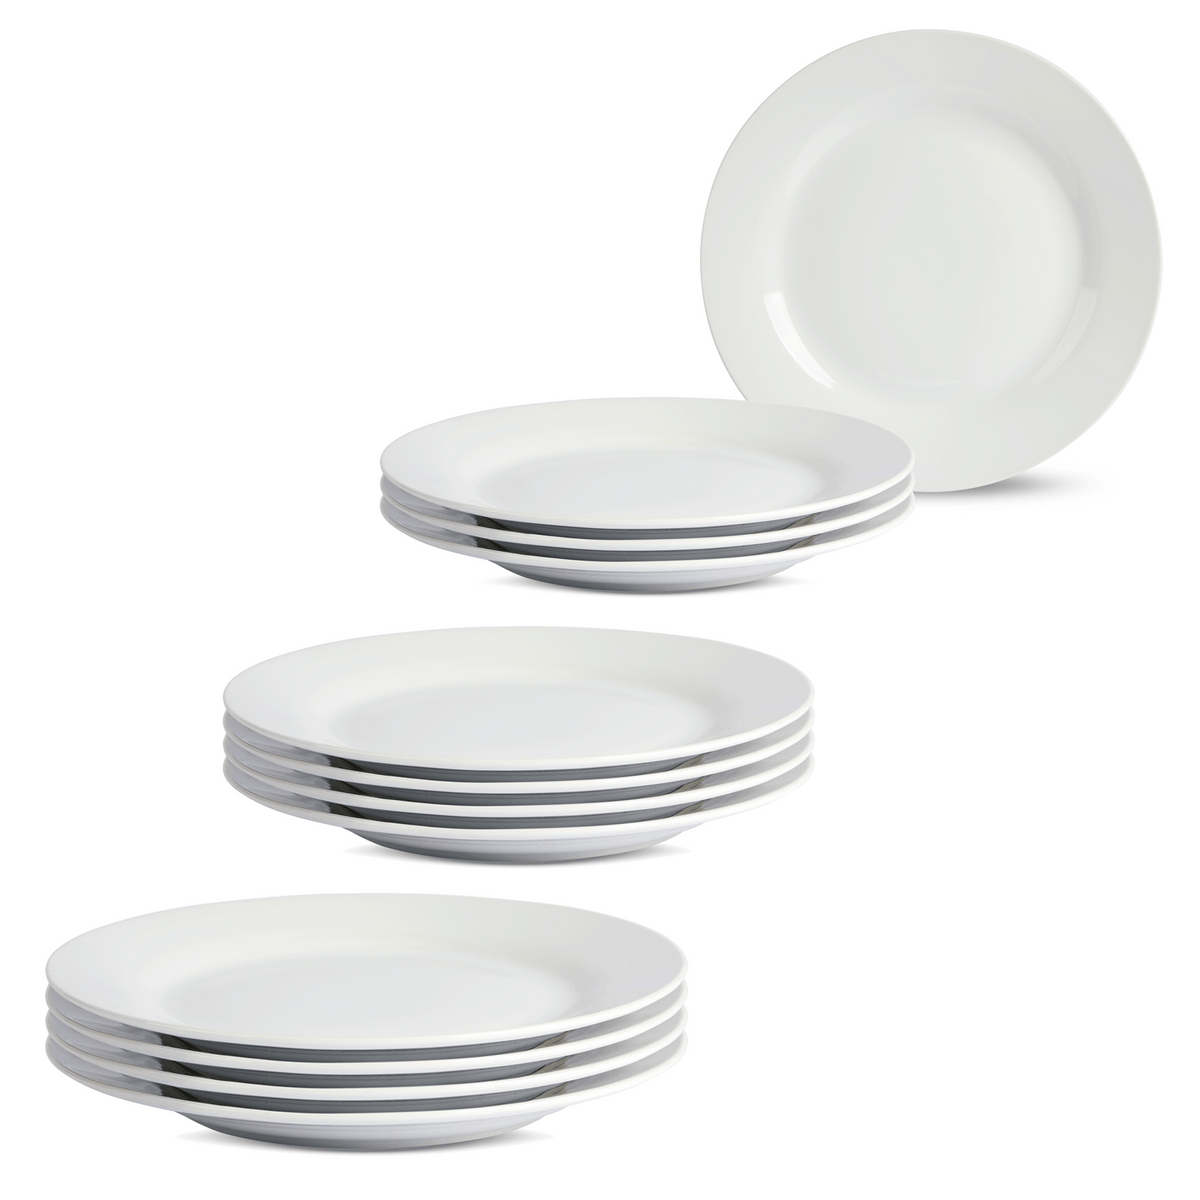 12 dinner plates, stacked and shown up and on end.